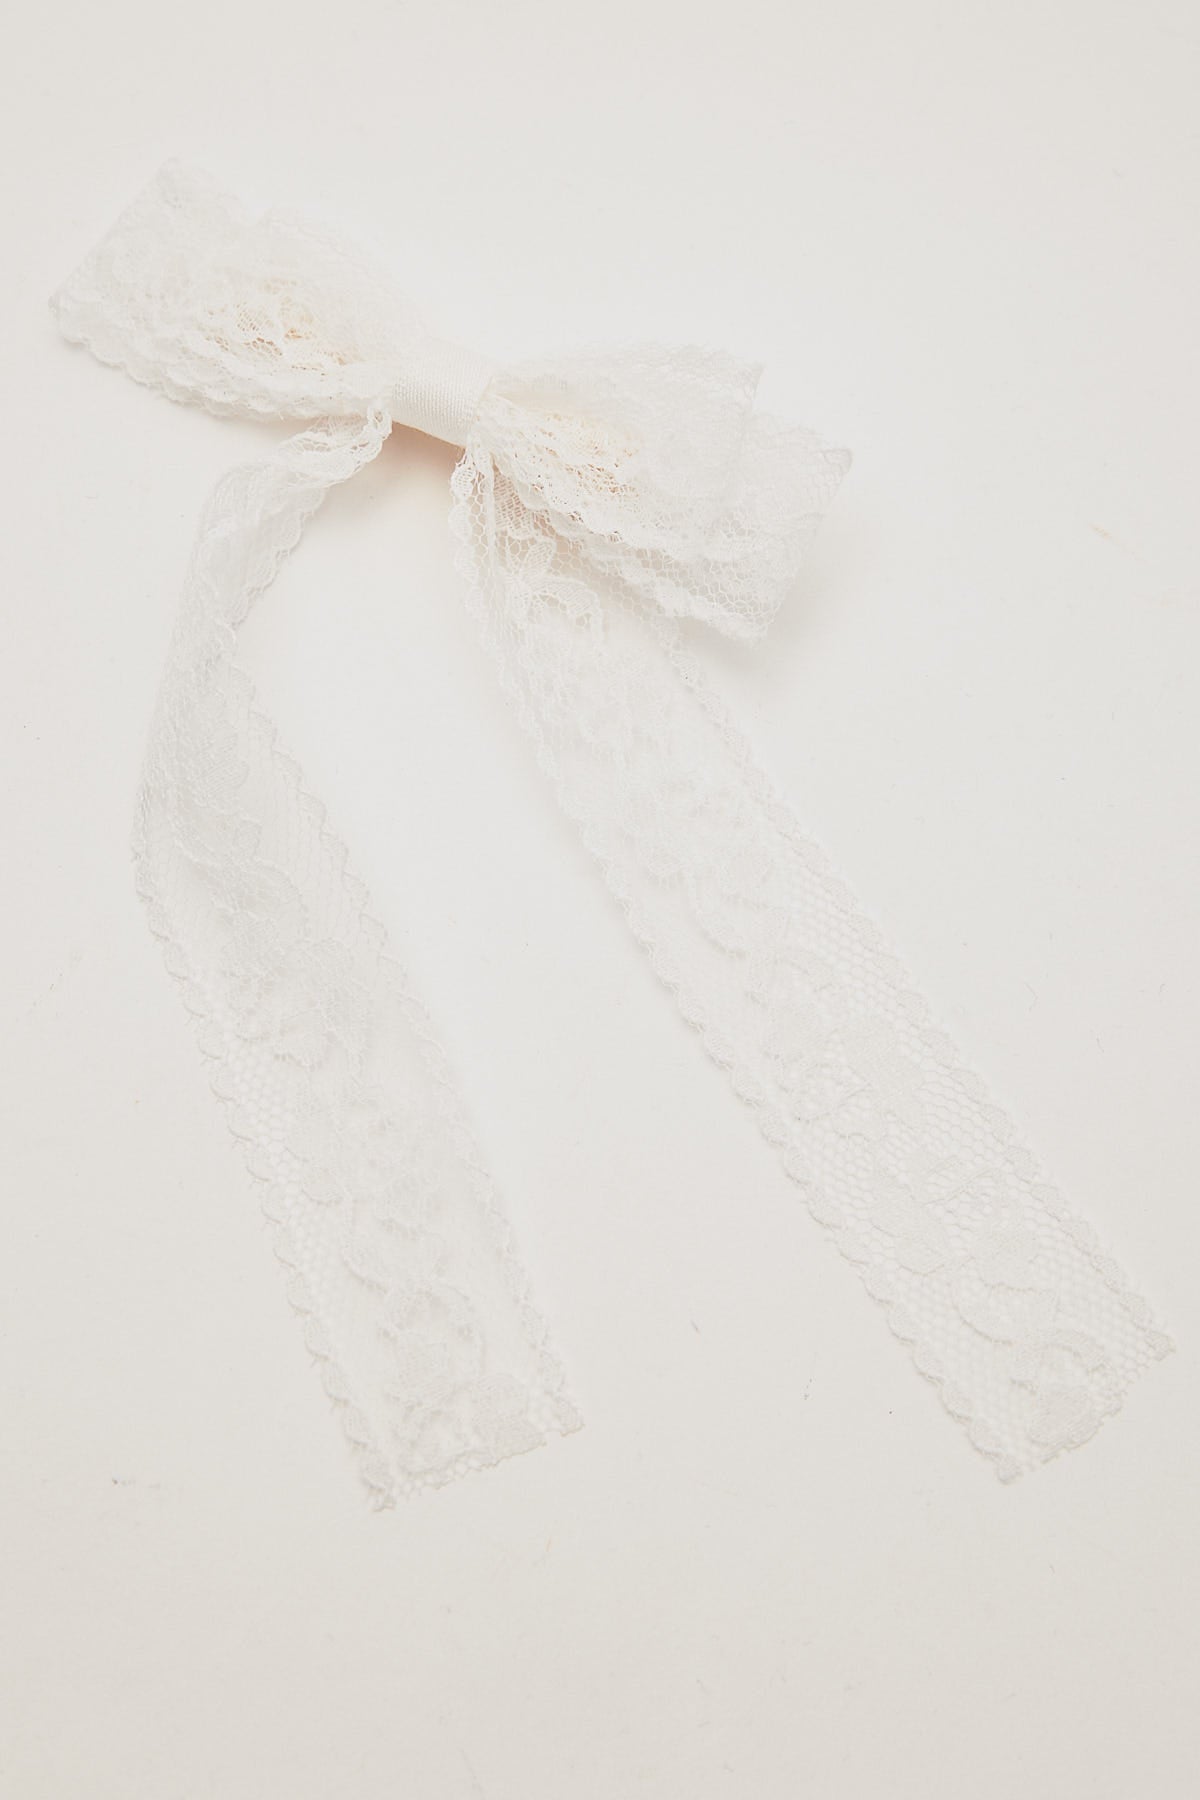 Token Lace Bow Hairties White